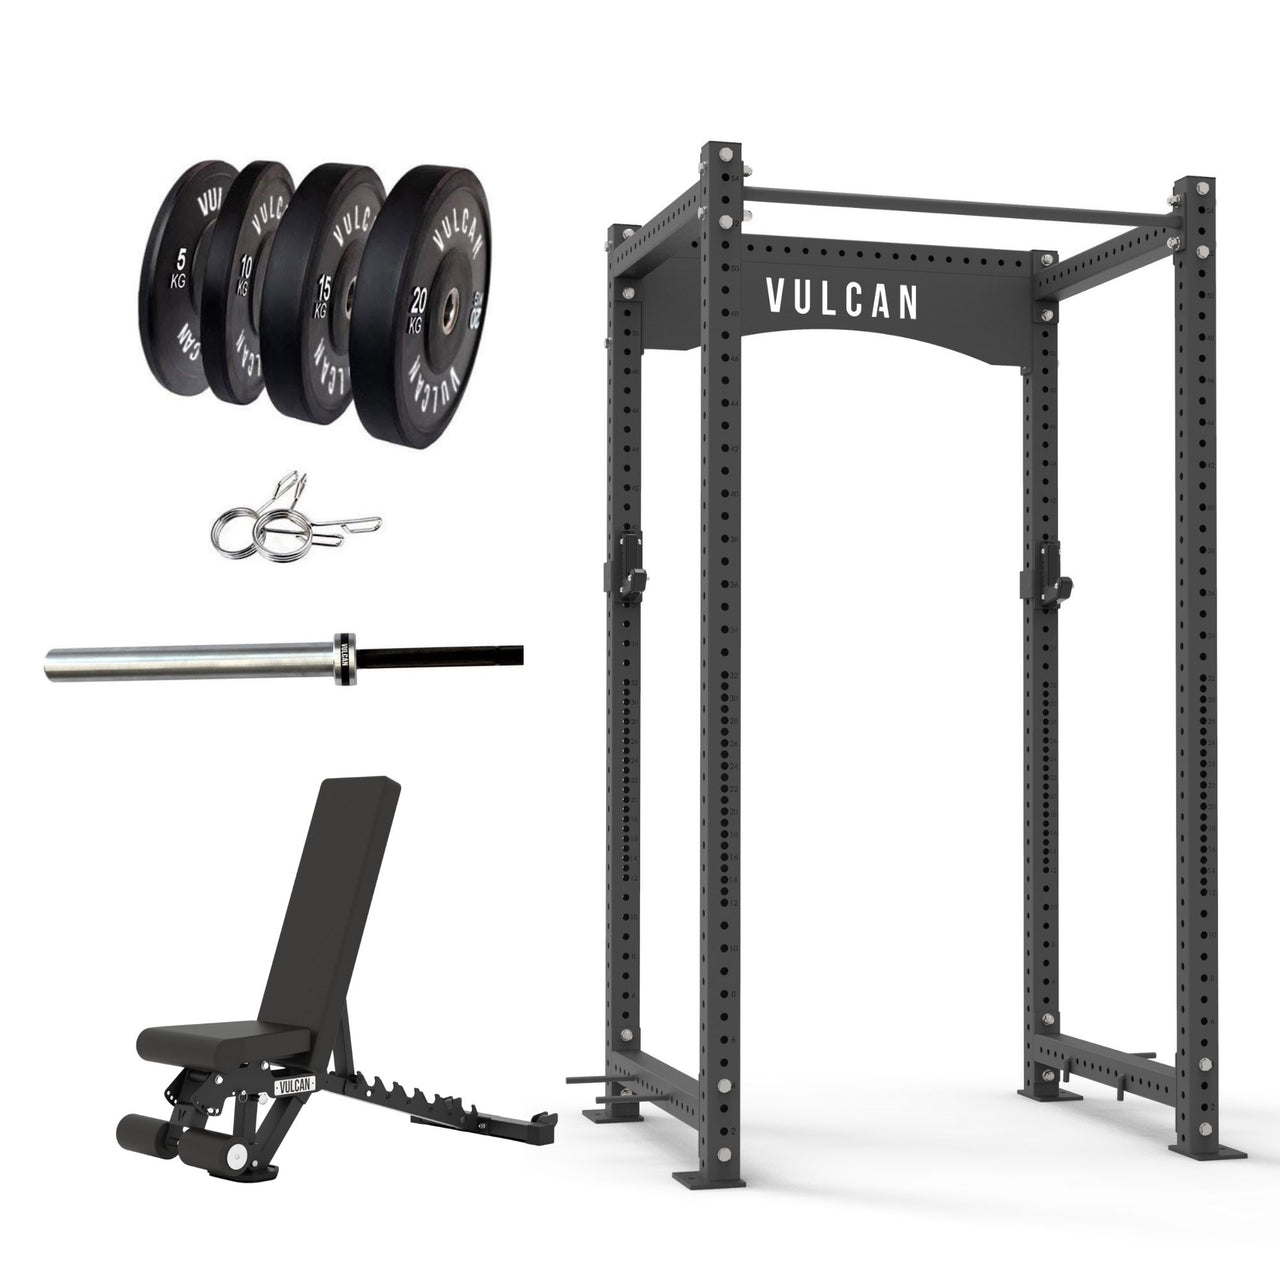 VULCAN Atlas Power Rack, Olympic Barbell, 100kg Black Bumper Weight Plates & Commercial FID Bench | IN STOCK